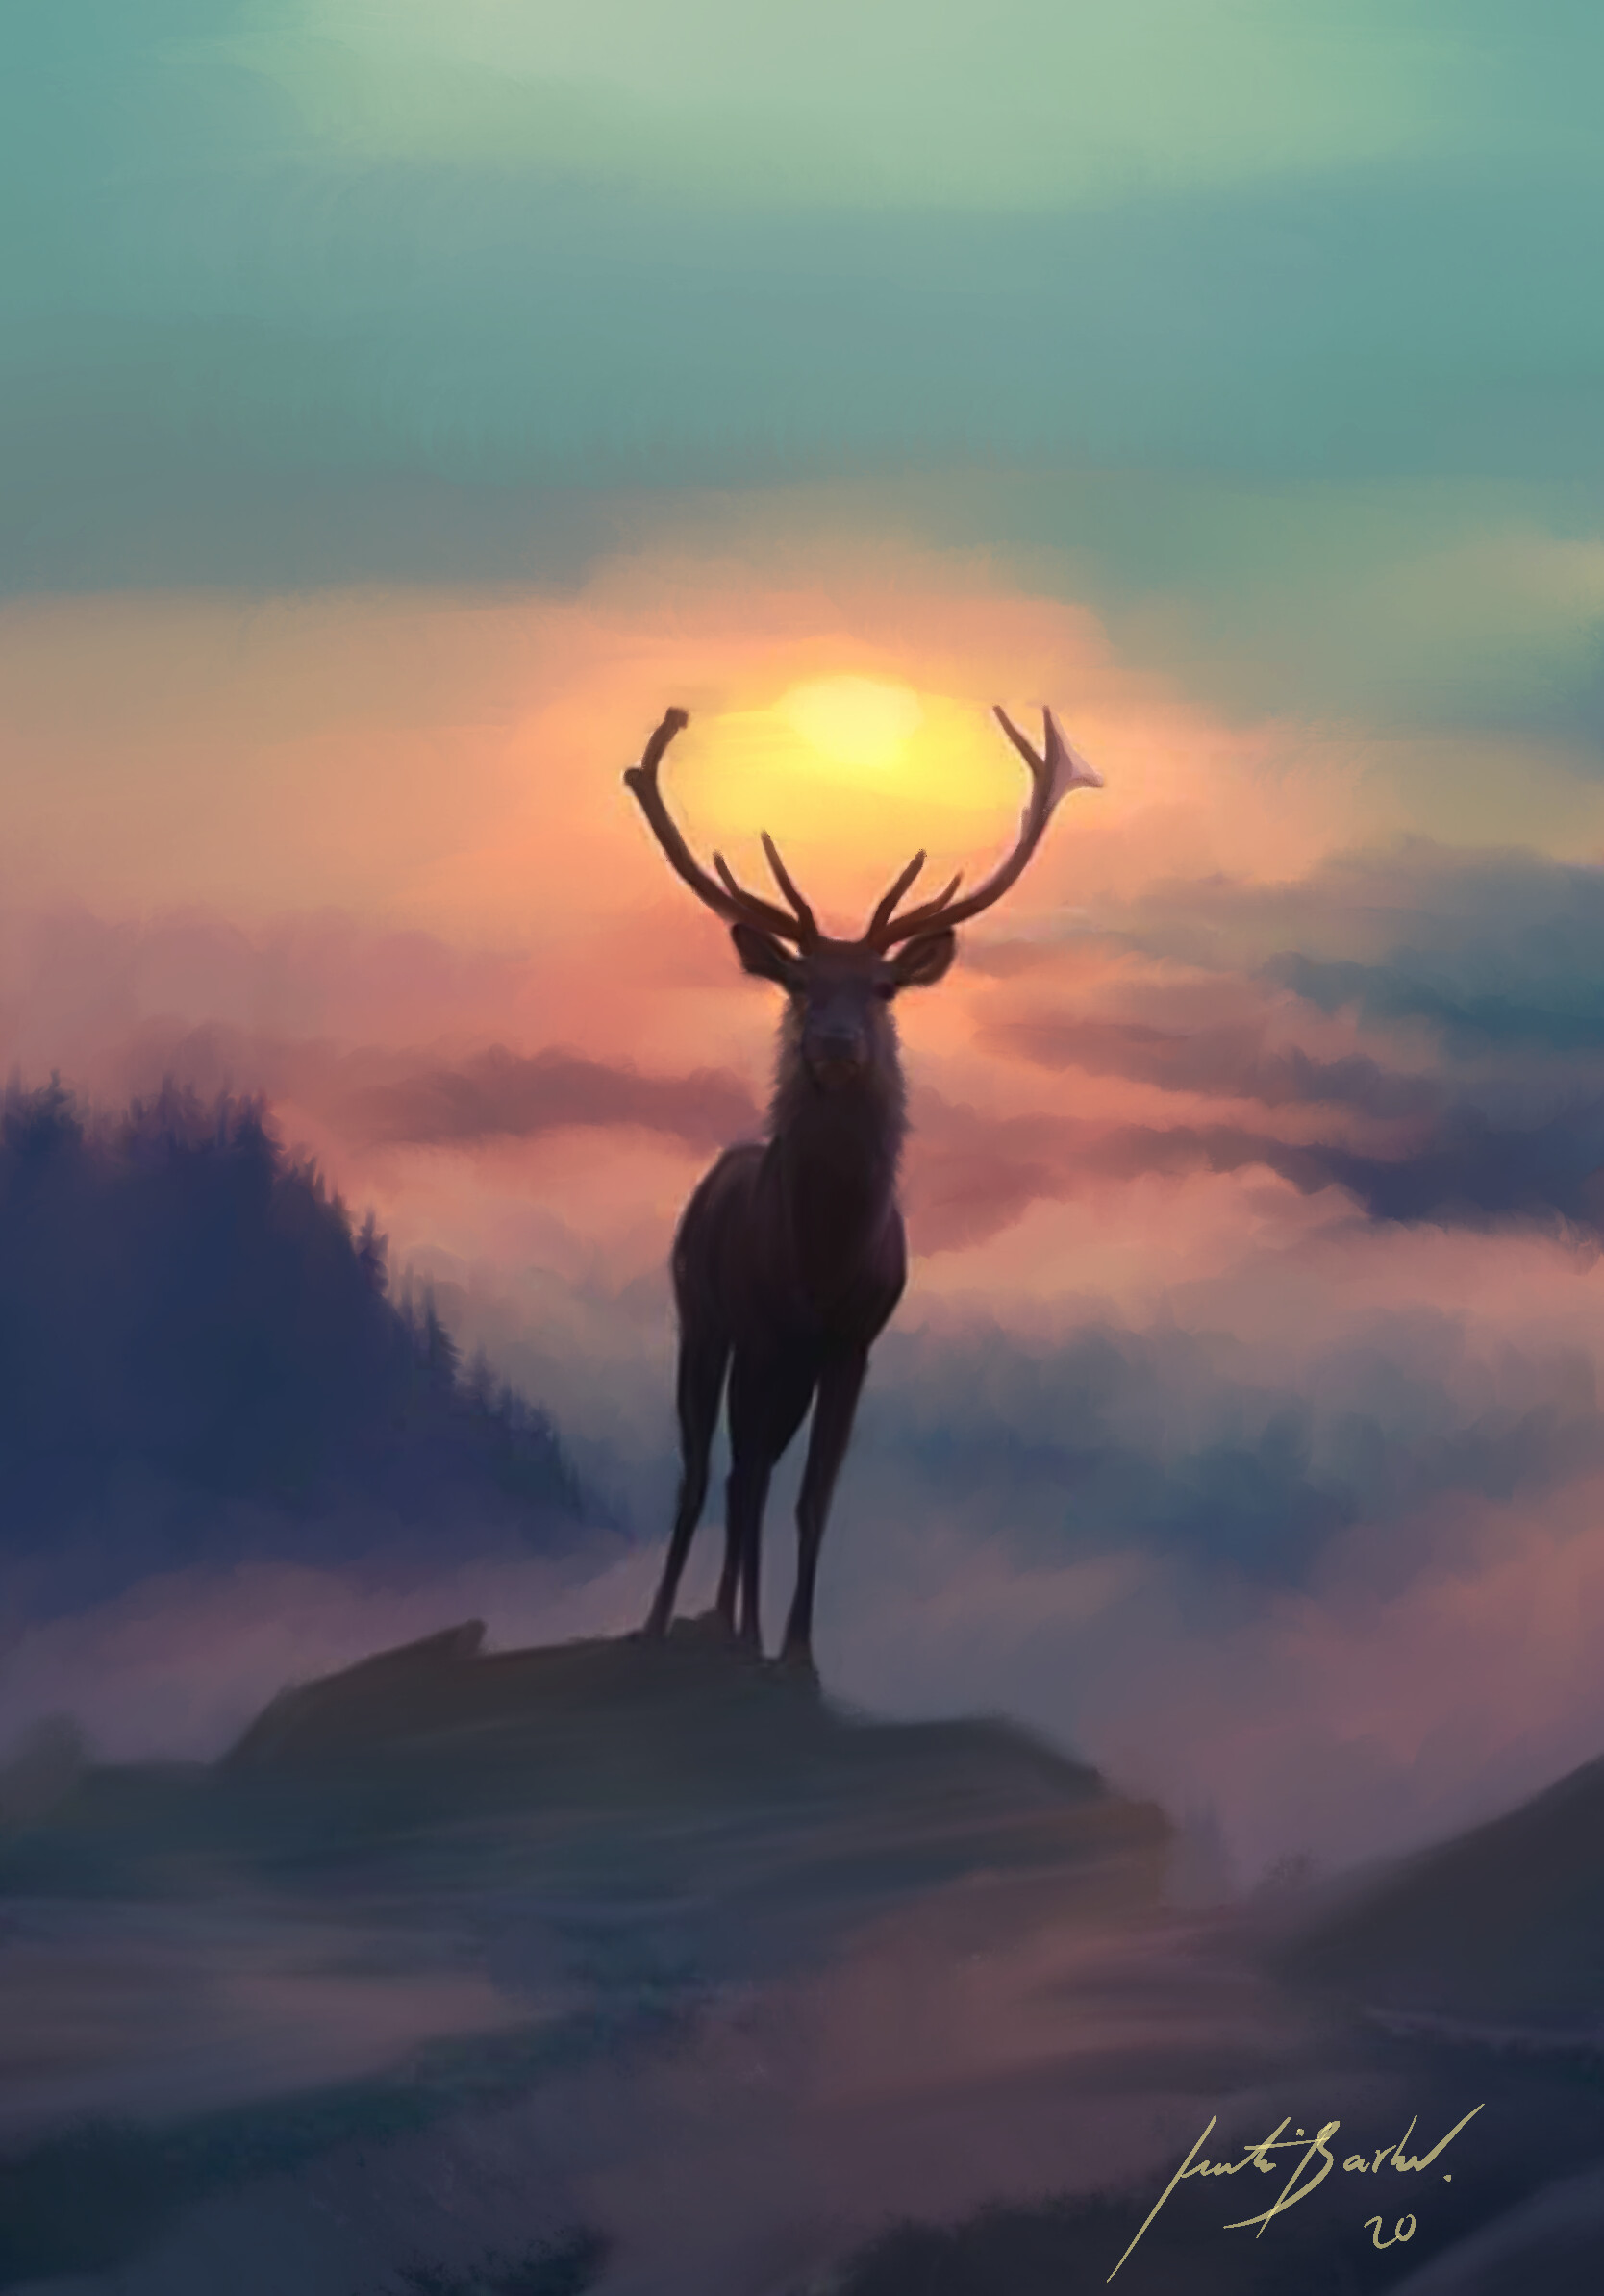 Digital painting of a deer standing on a hill at sunset - Deer